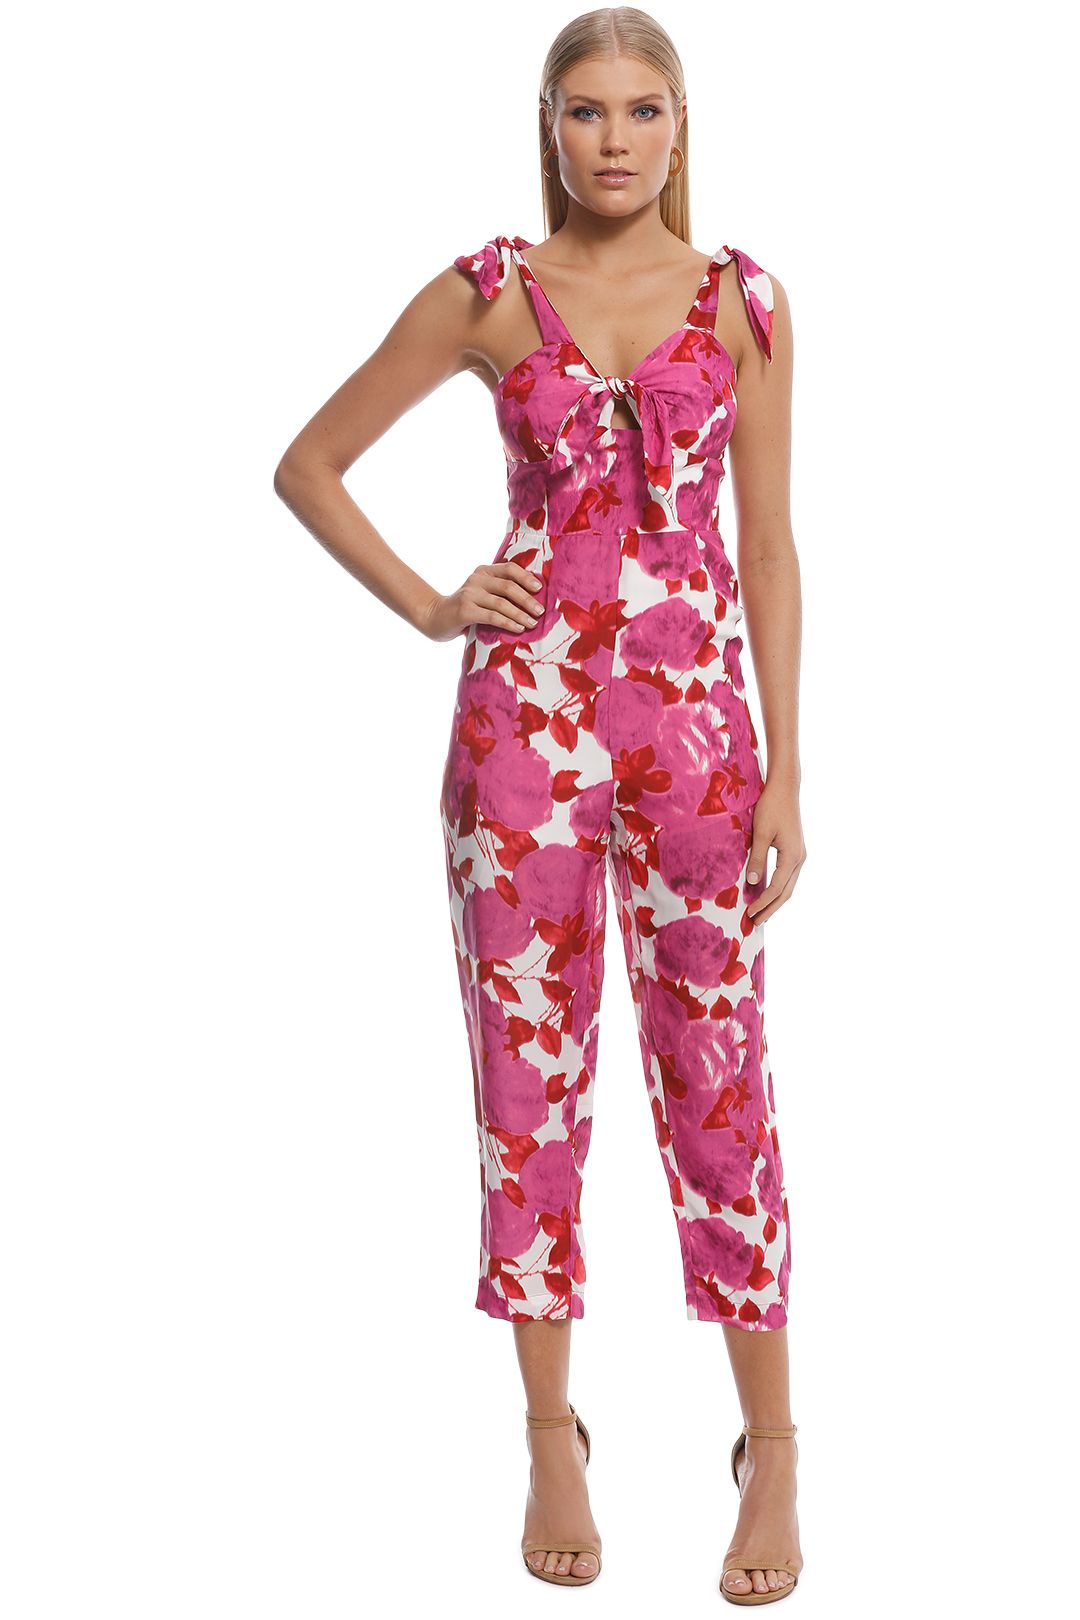 Betty Baby Jumpsuit in Plum by Alice McCall for Rent | GlamCorner